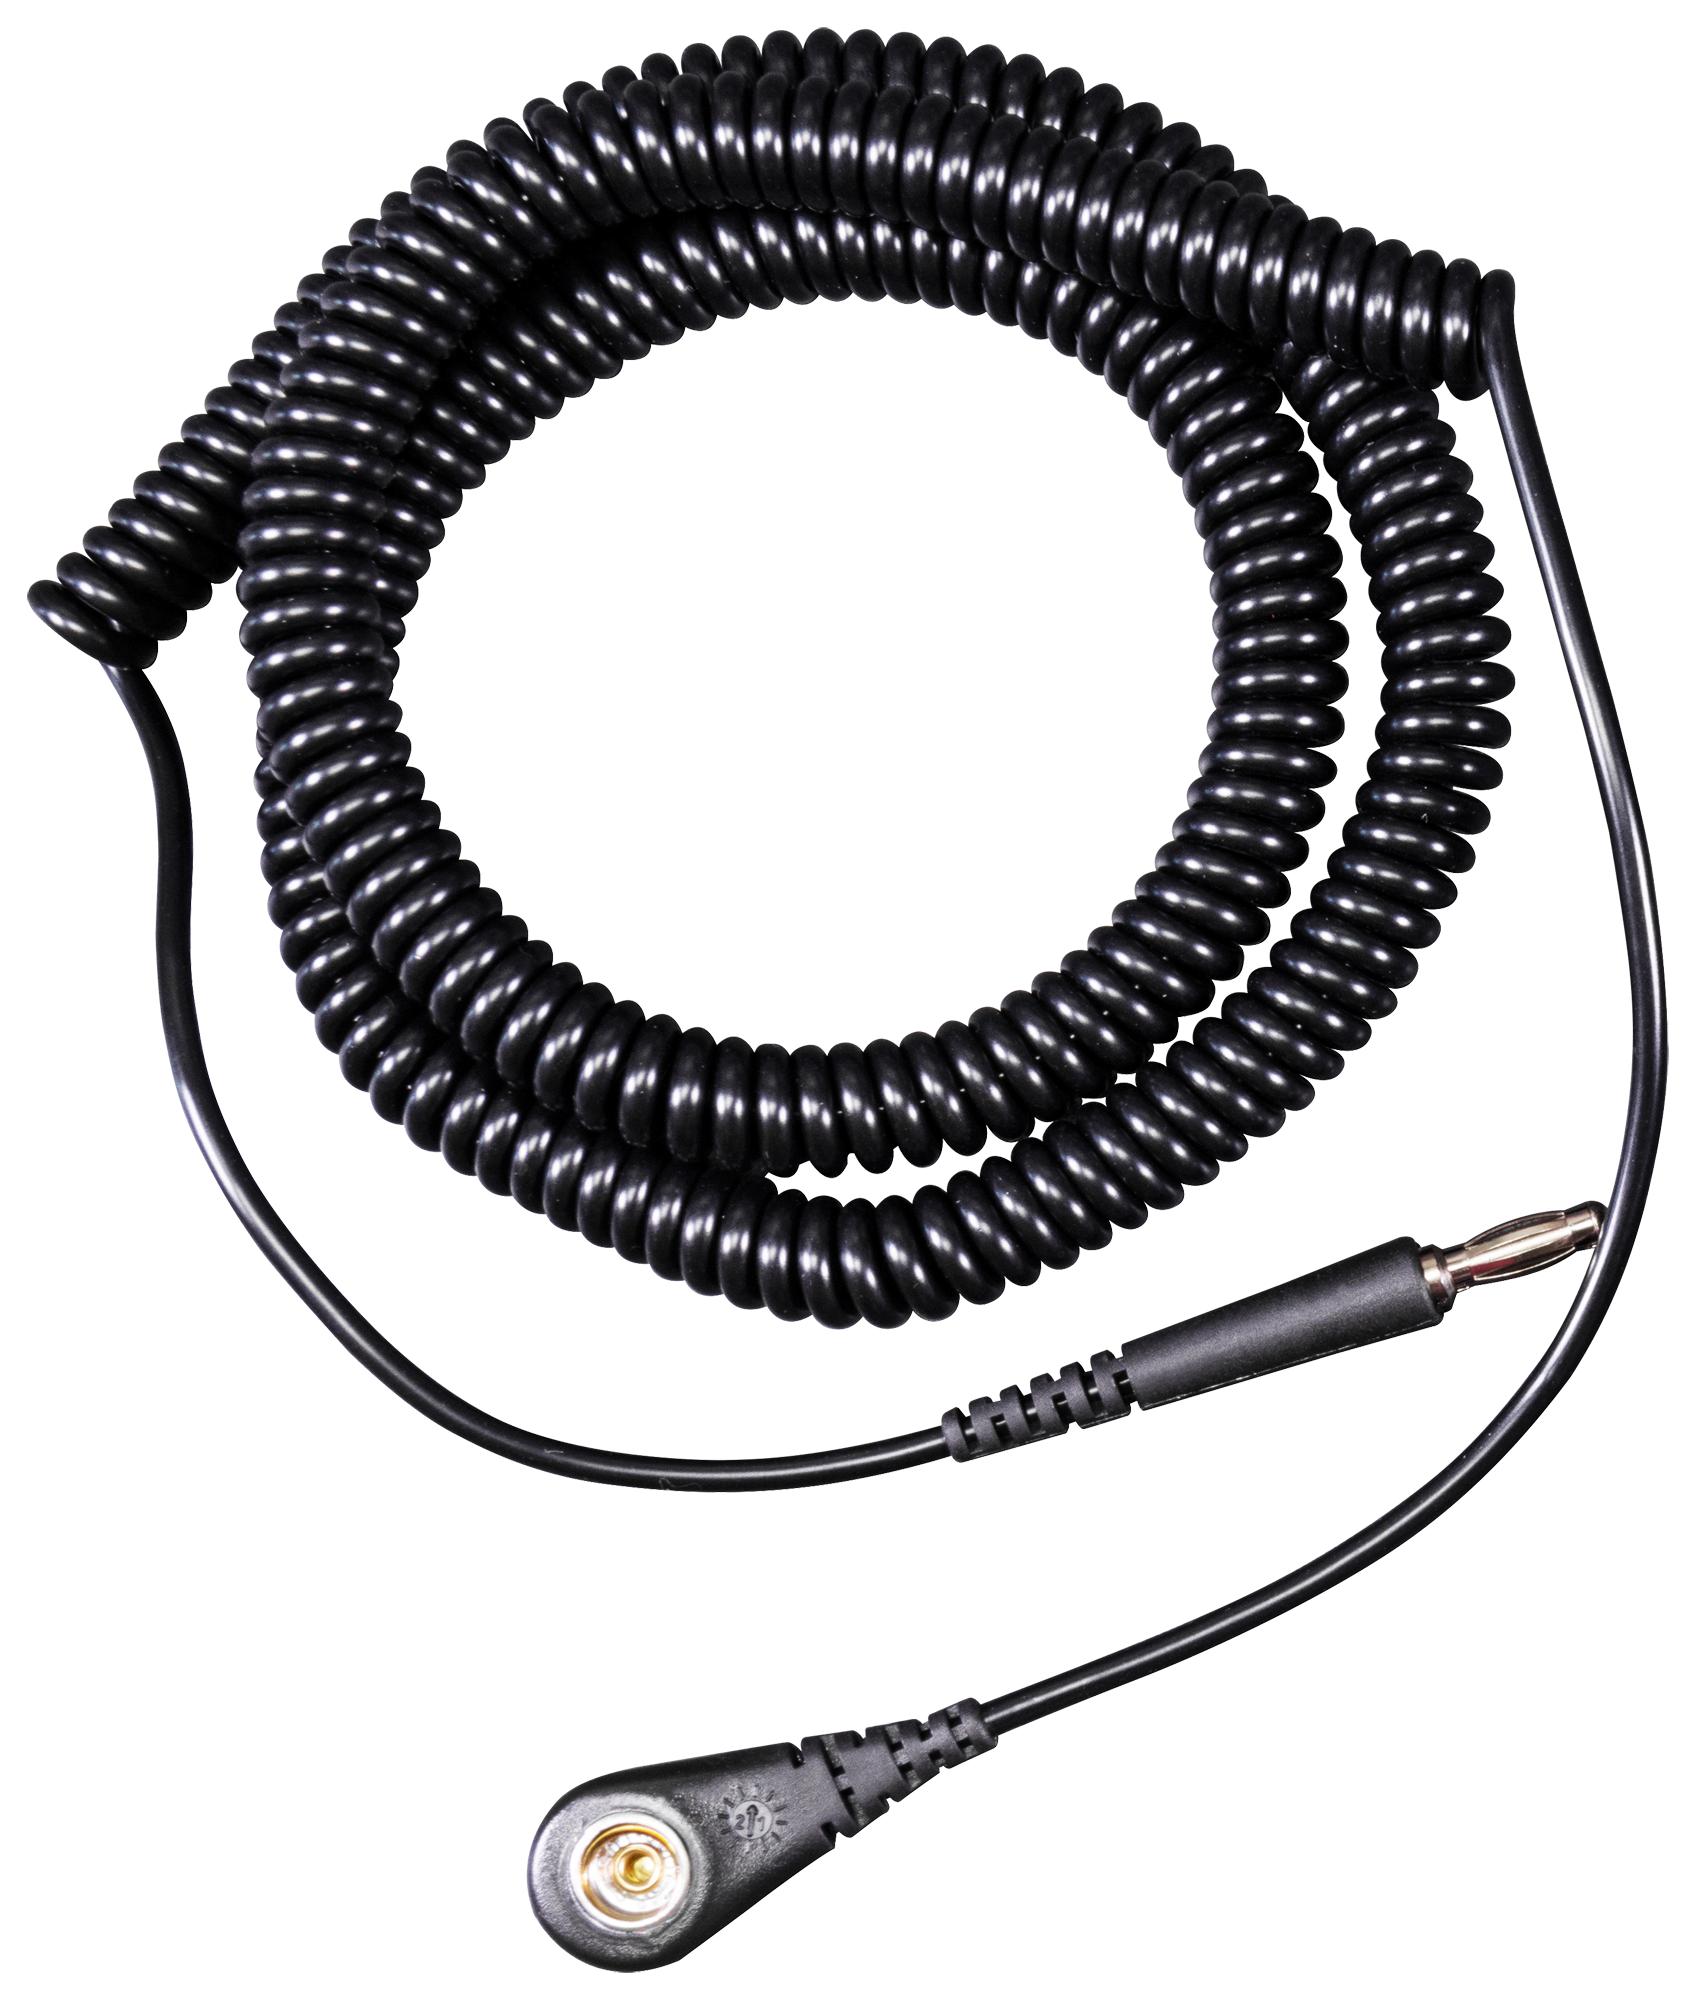 Desco 19864 Coiled Ground Cord, 7mm Snap, 12Ft